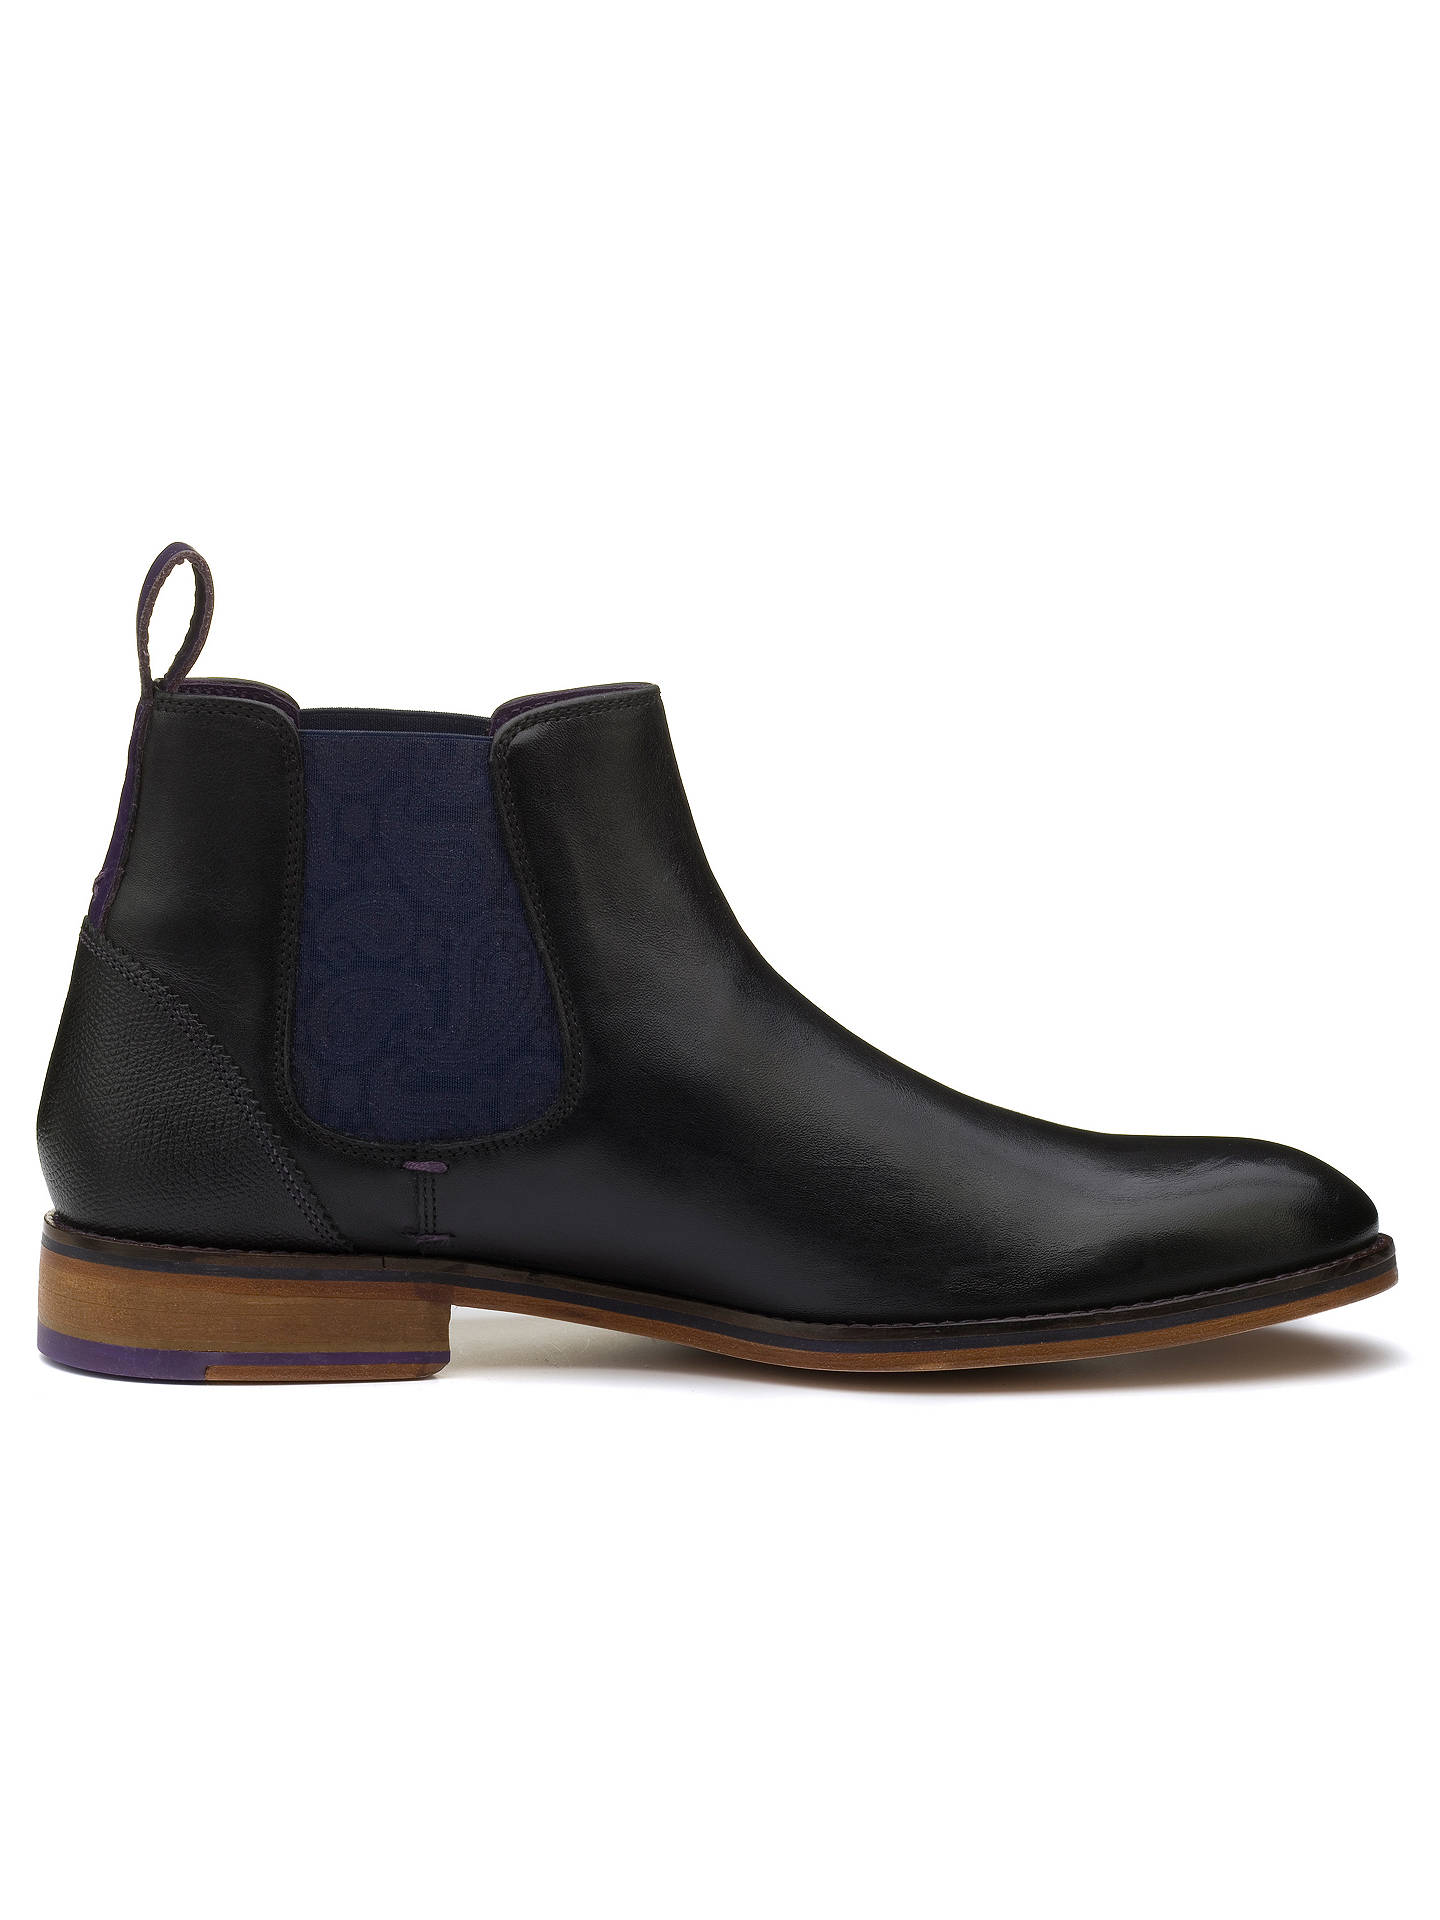 Ted Baker Camroon 4 Chelsea Boots at John Lewis & Partners